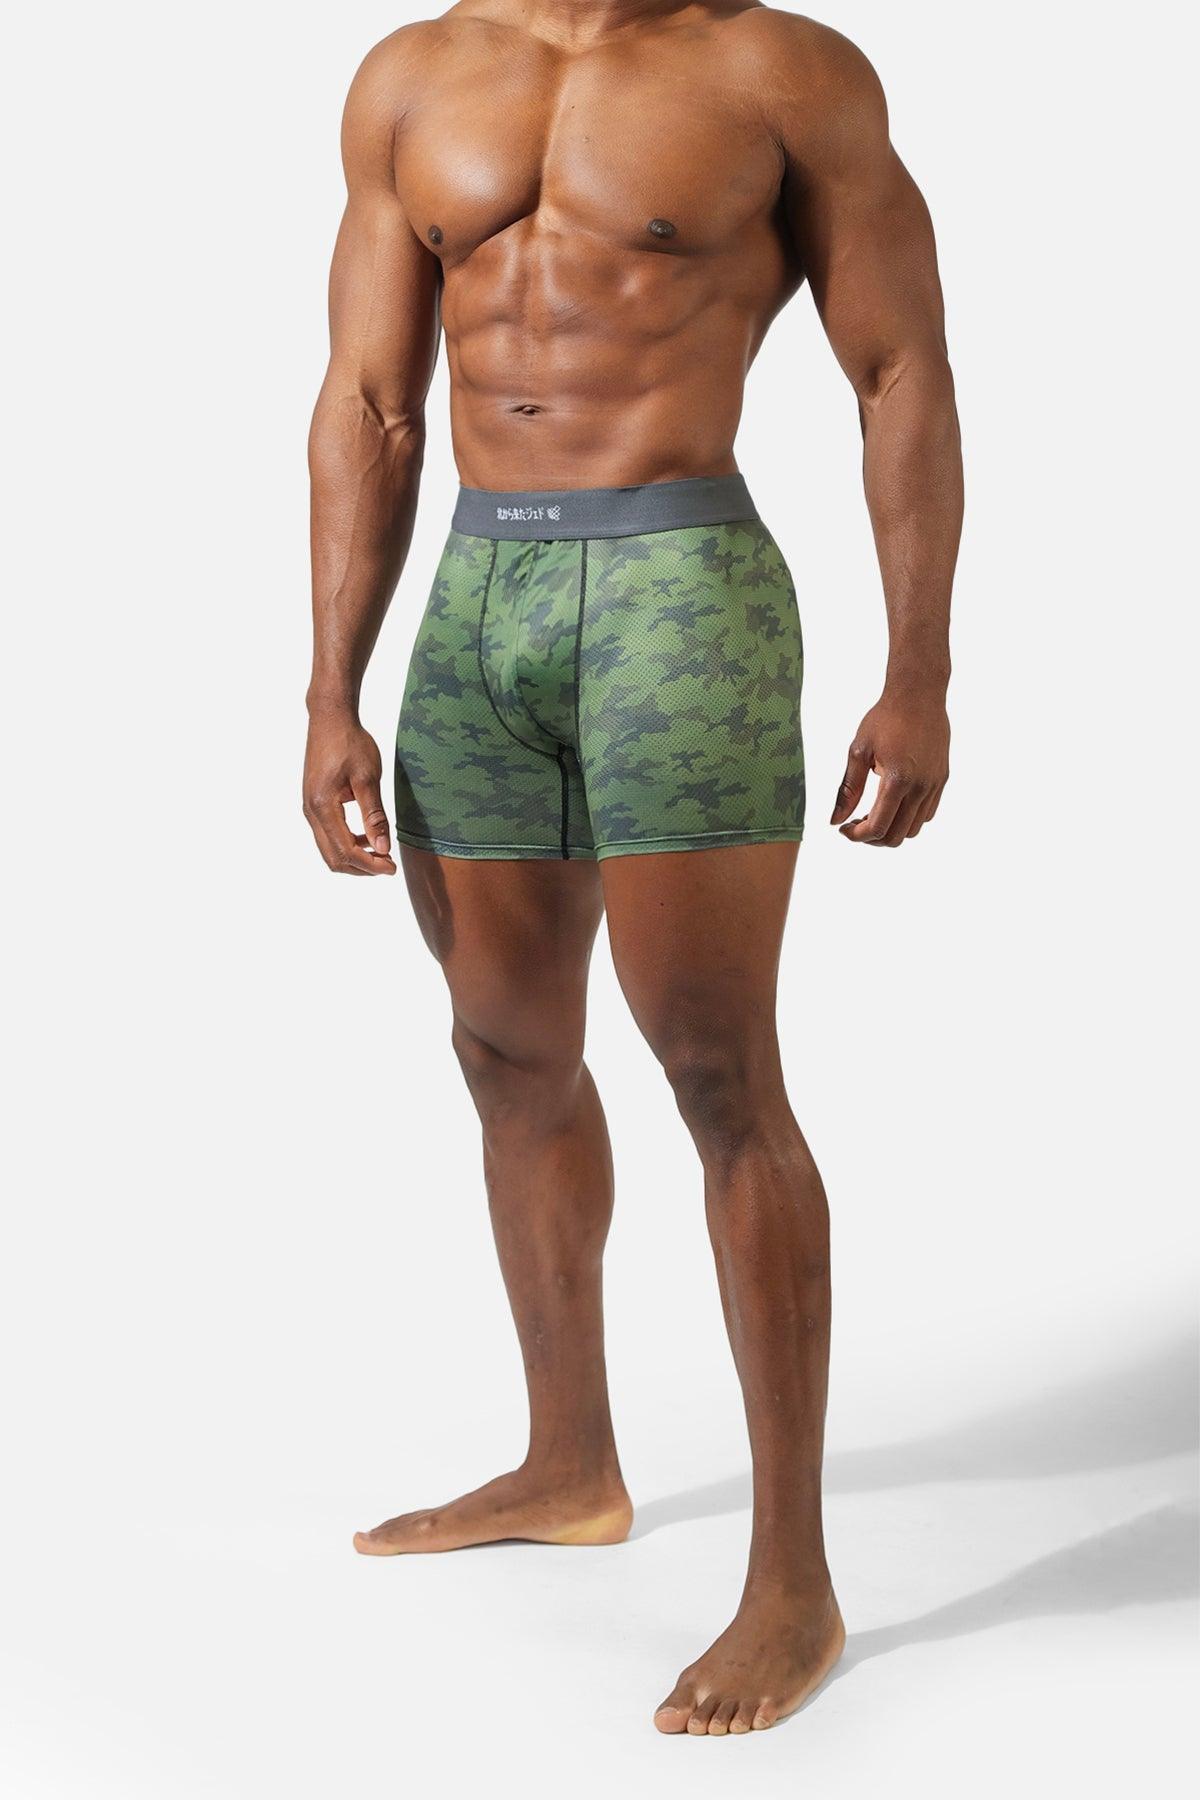 Men's Full Mesh Boxer Briefs 2 Pack - Green Camo and Black Brush - Jed North Canada